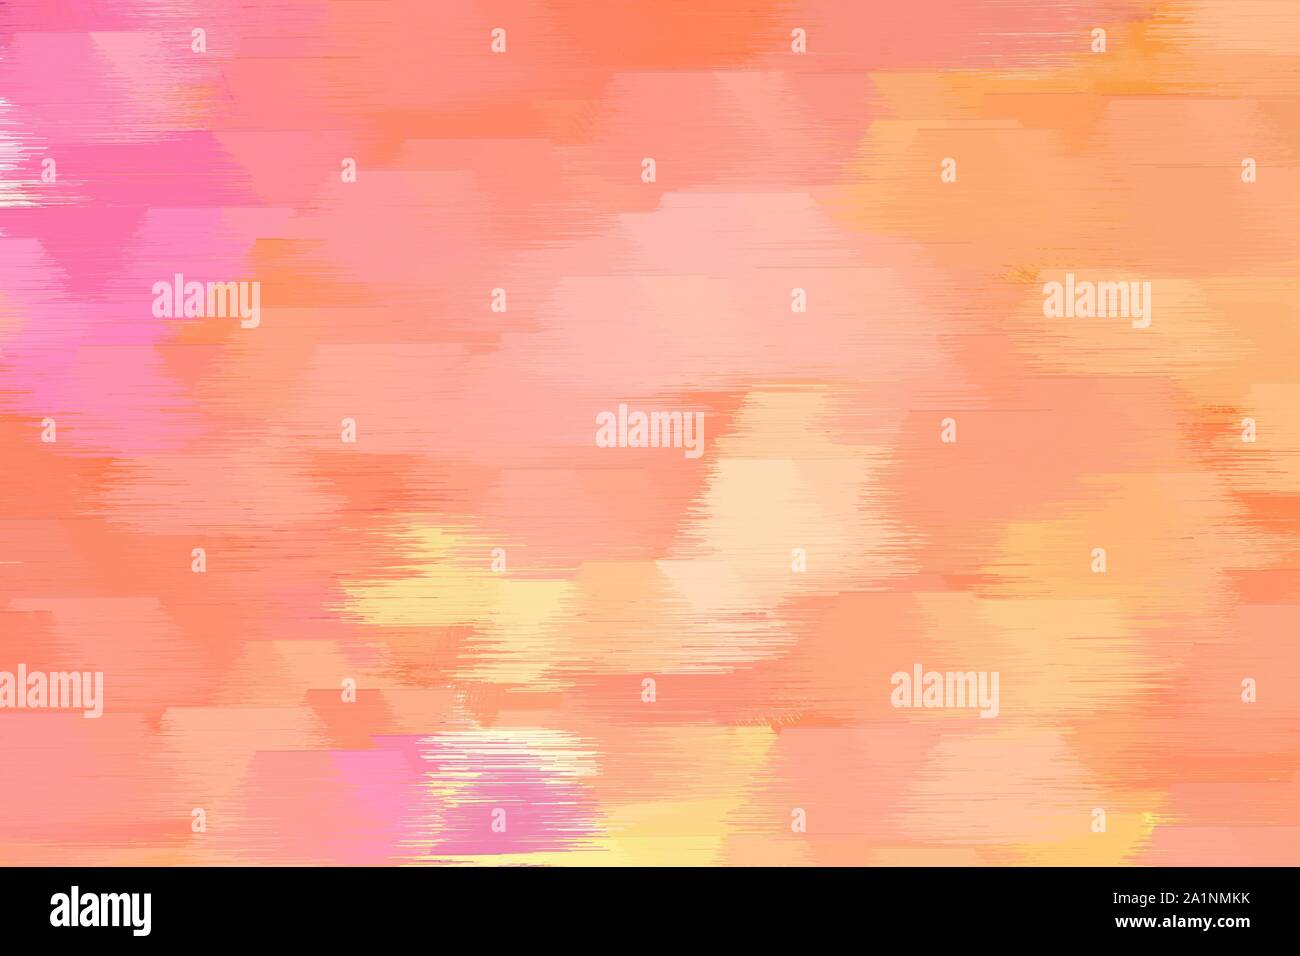 light salmon, pastel magenta and skin colored artwork wallpaper. can be  used as texture, graphic element or background Stock Photo - Alamy